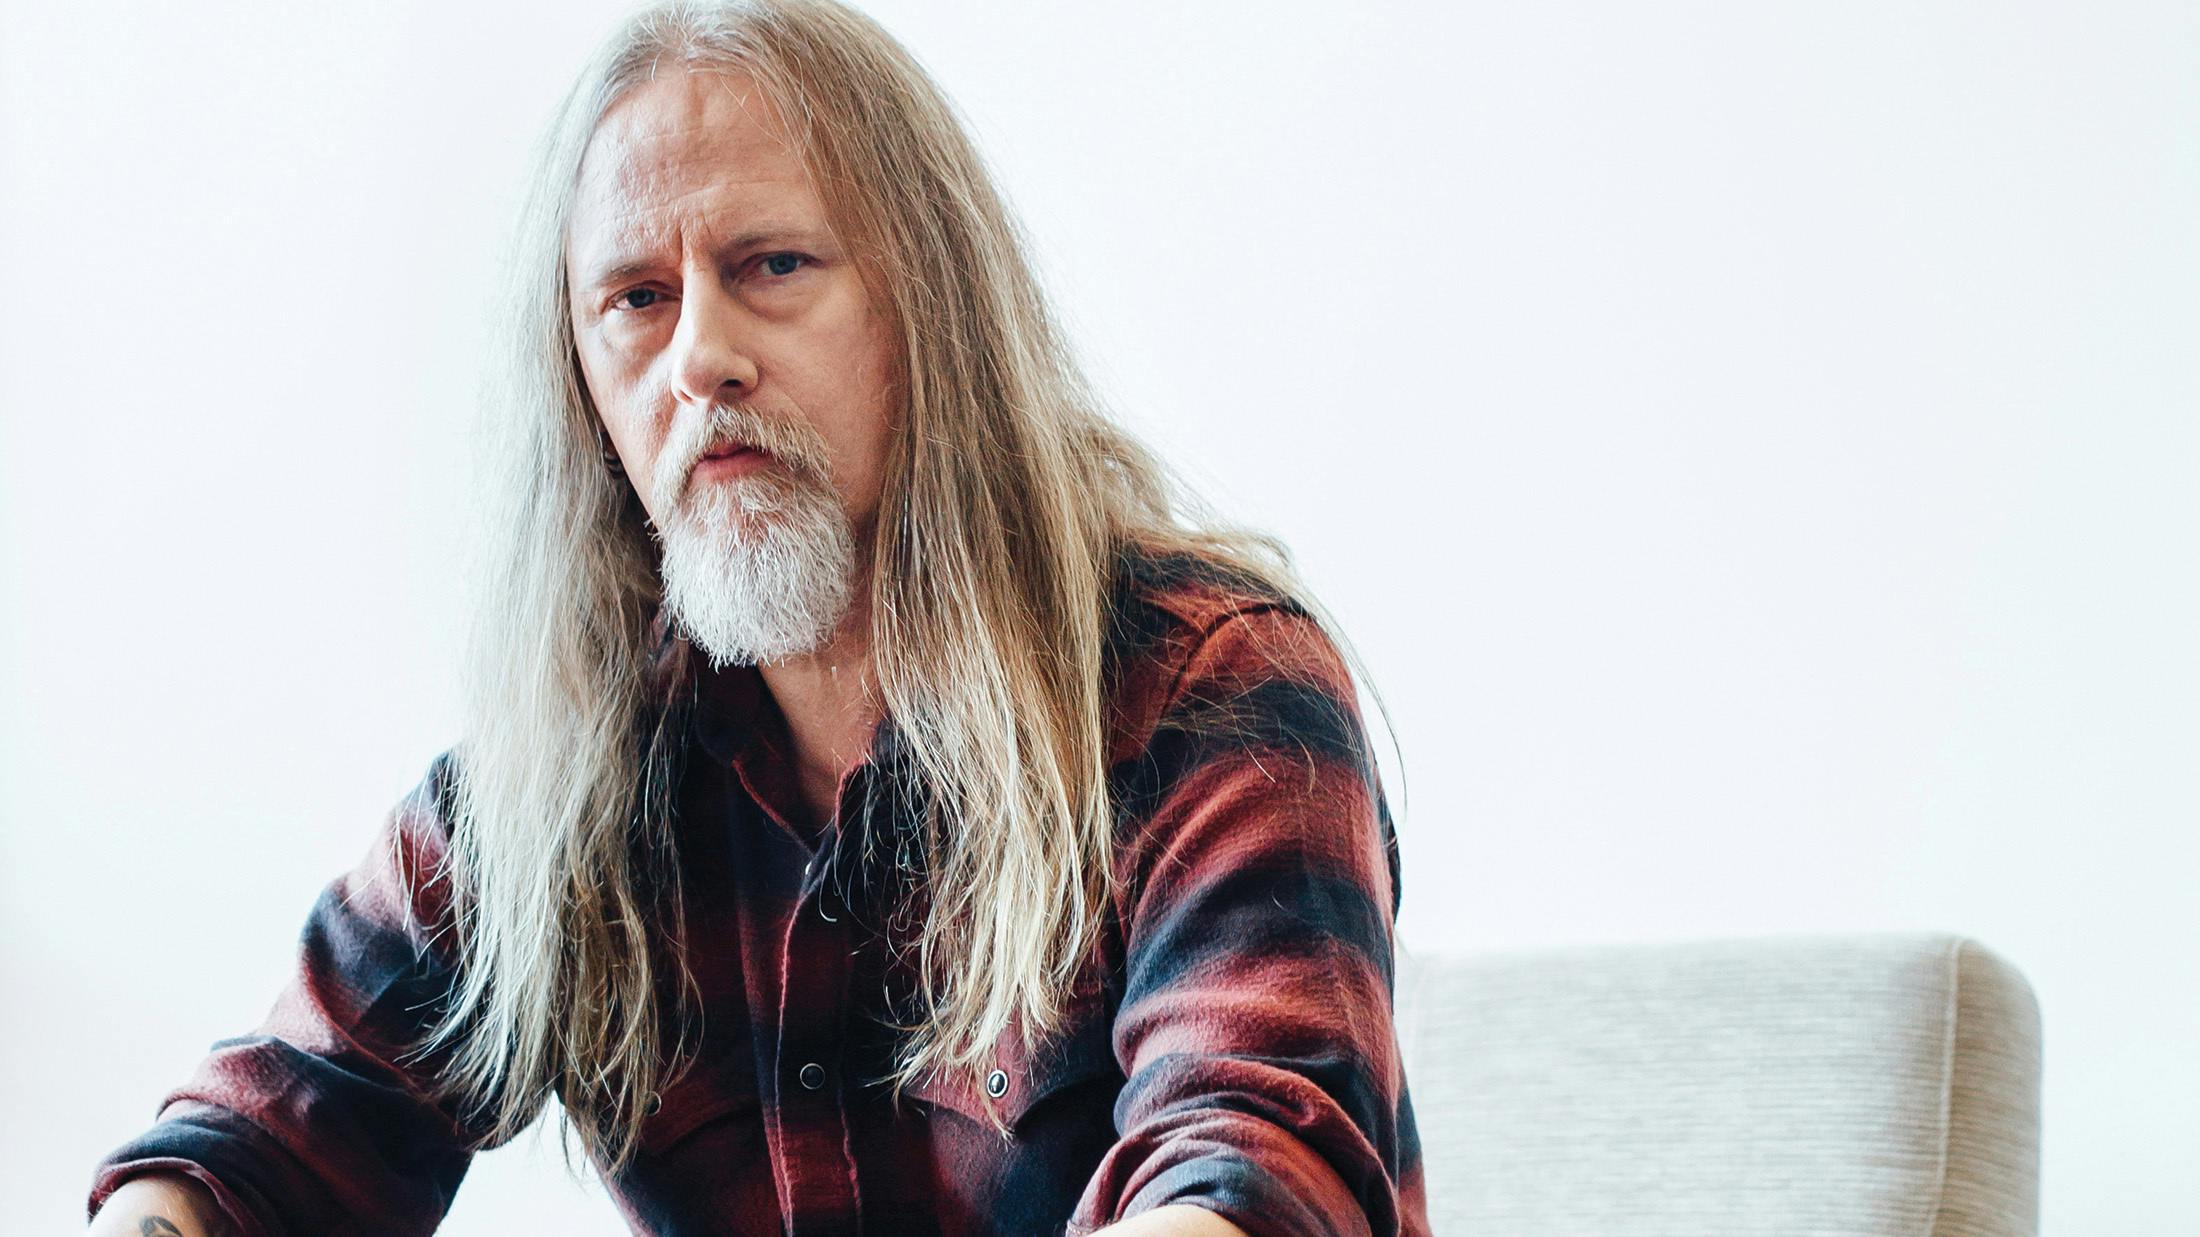 Jerry Cantrell: “I knew what being a rock star was from an early age, I knew it wasn’t a safe path, but I’ve always been a gambler”